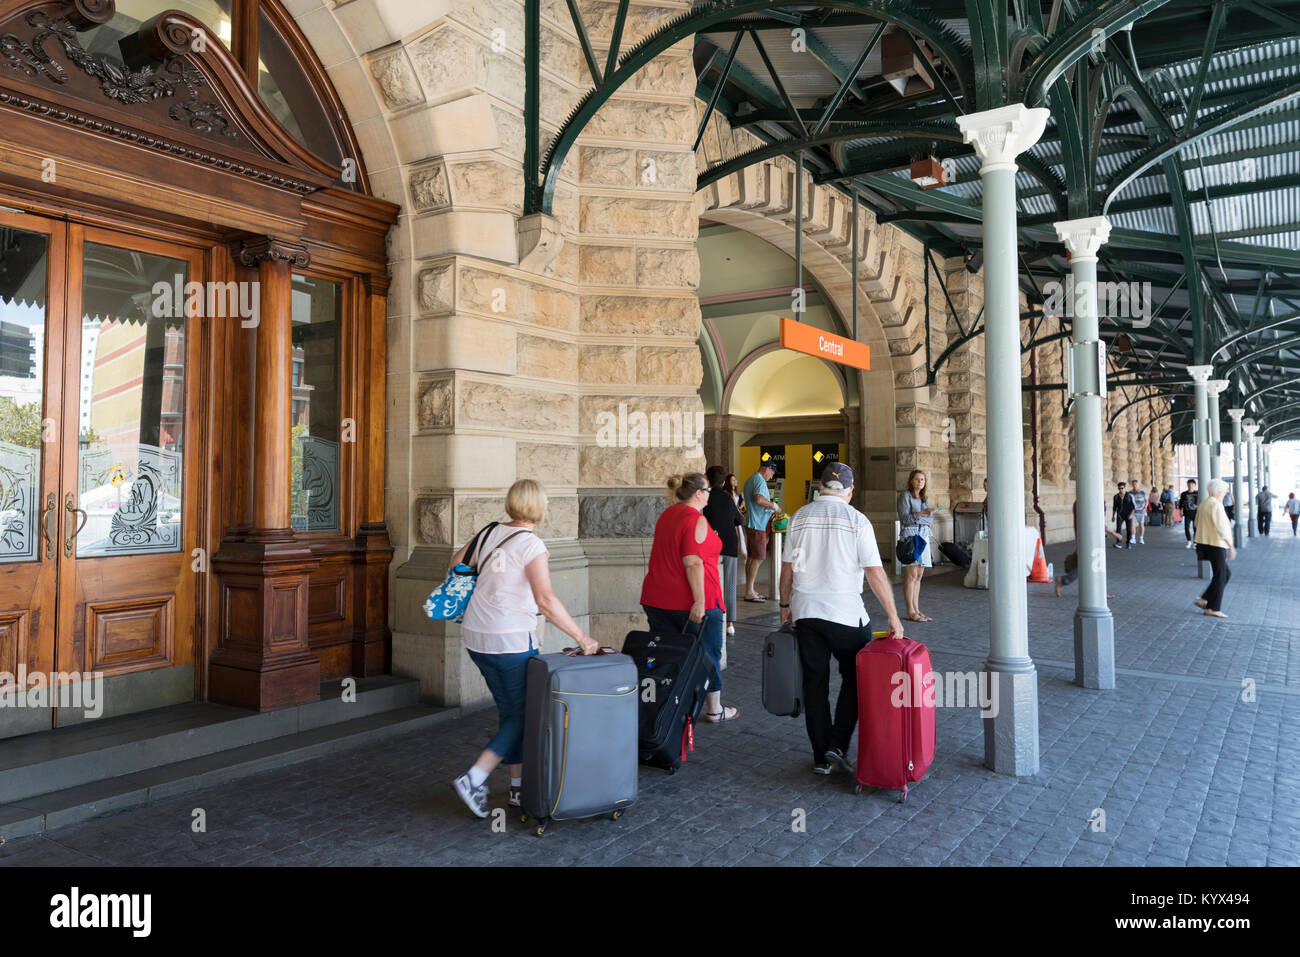 People with suitcases and luggage at the entrance to Central Station, Sydney, Australia Stock Photo